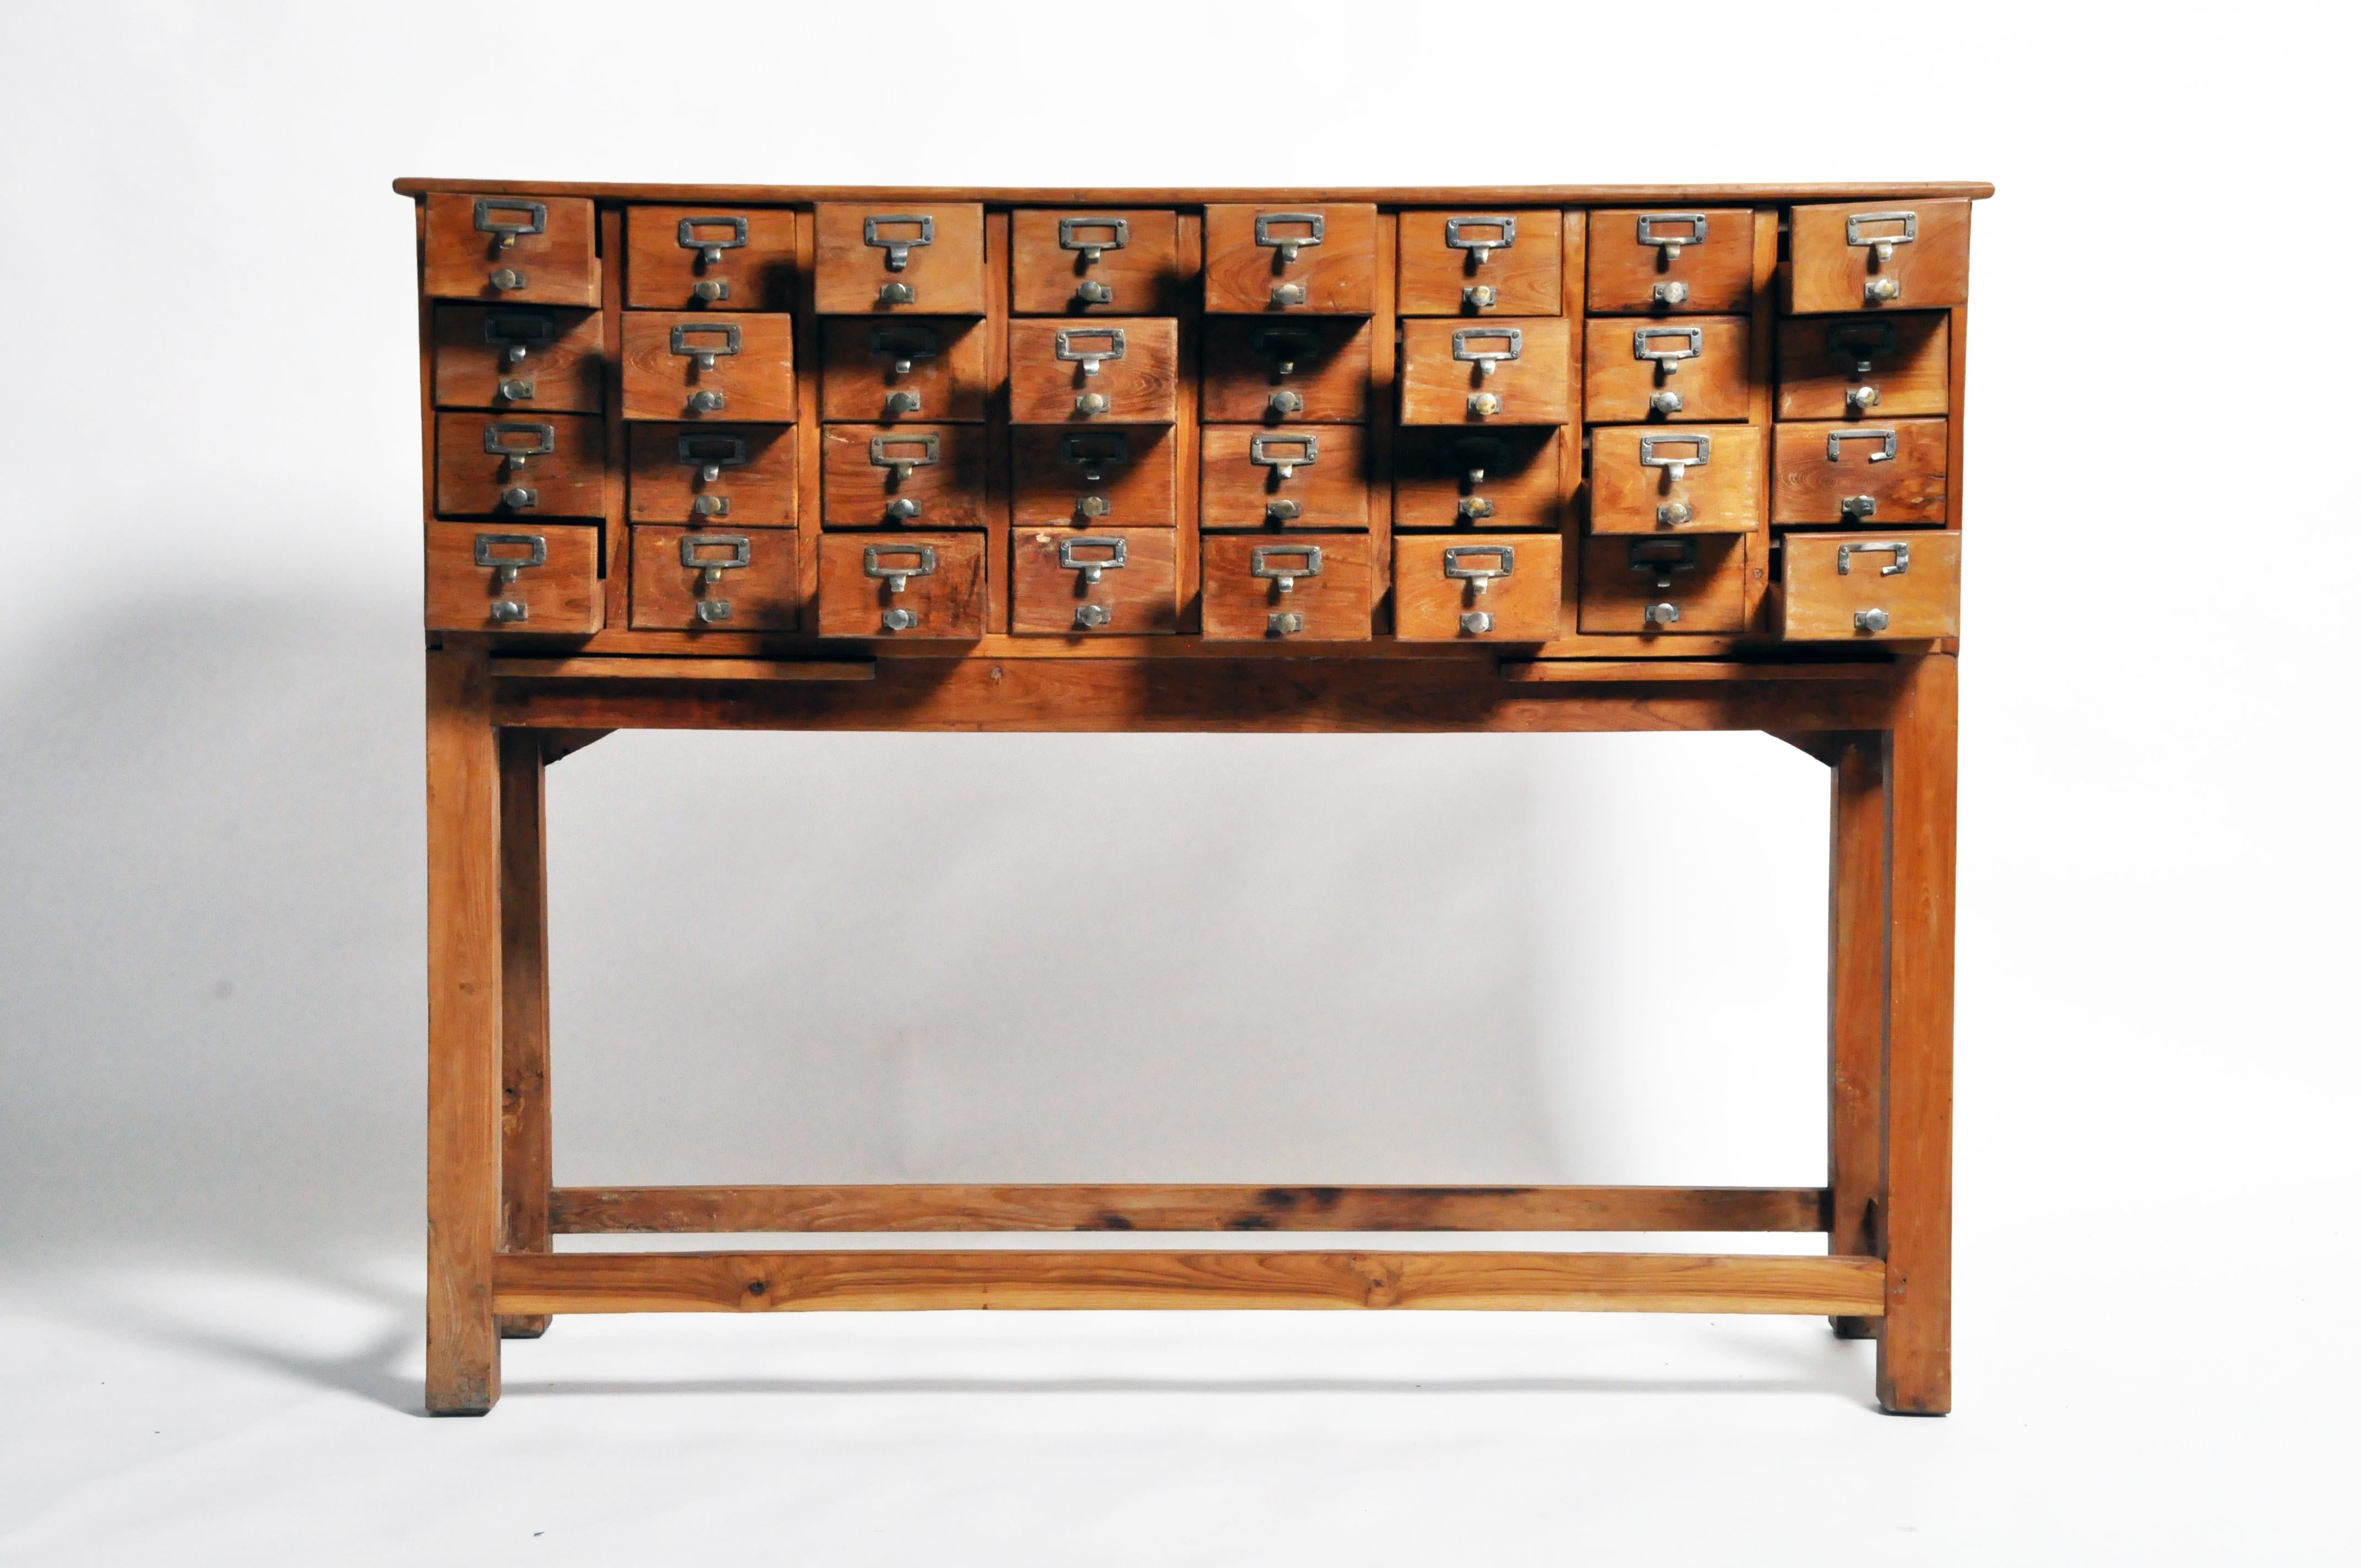 This impressive chest features 32 drawers reminiscent of a library card catalog and two retractable shelves. Made of teakwood, the piece has a lovely golden hue and visible grain. At nearly five feet in height, the chest is functional and a lovely